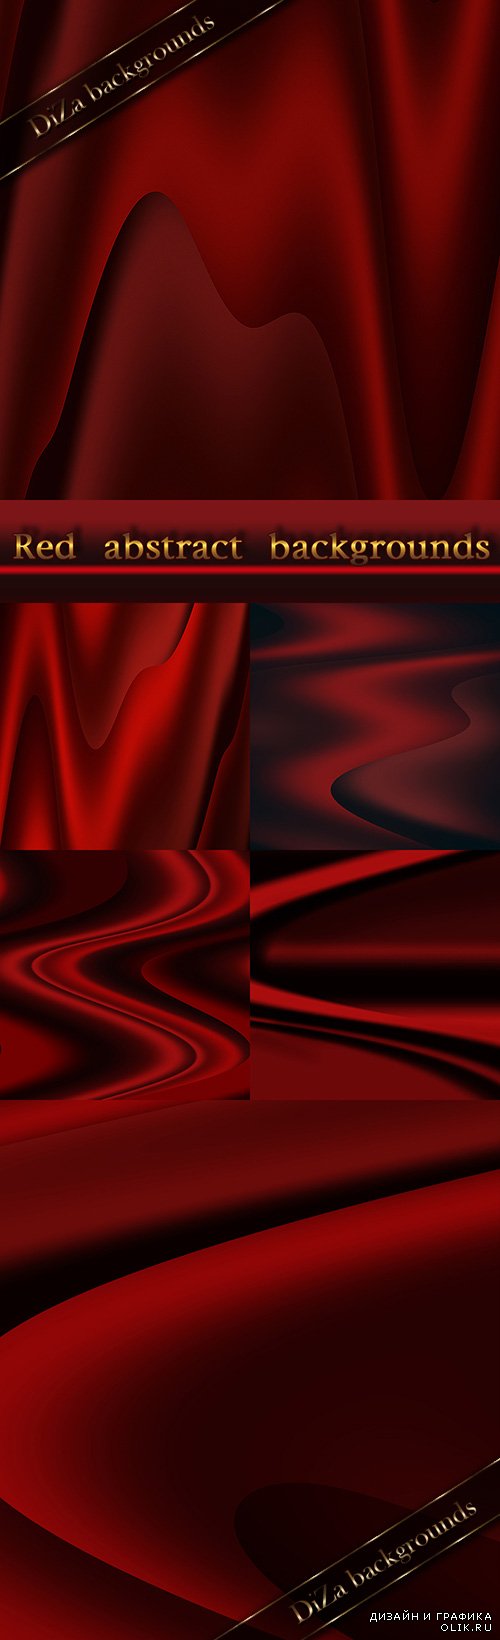 Red abstract backgrounds